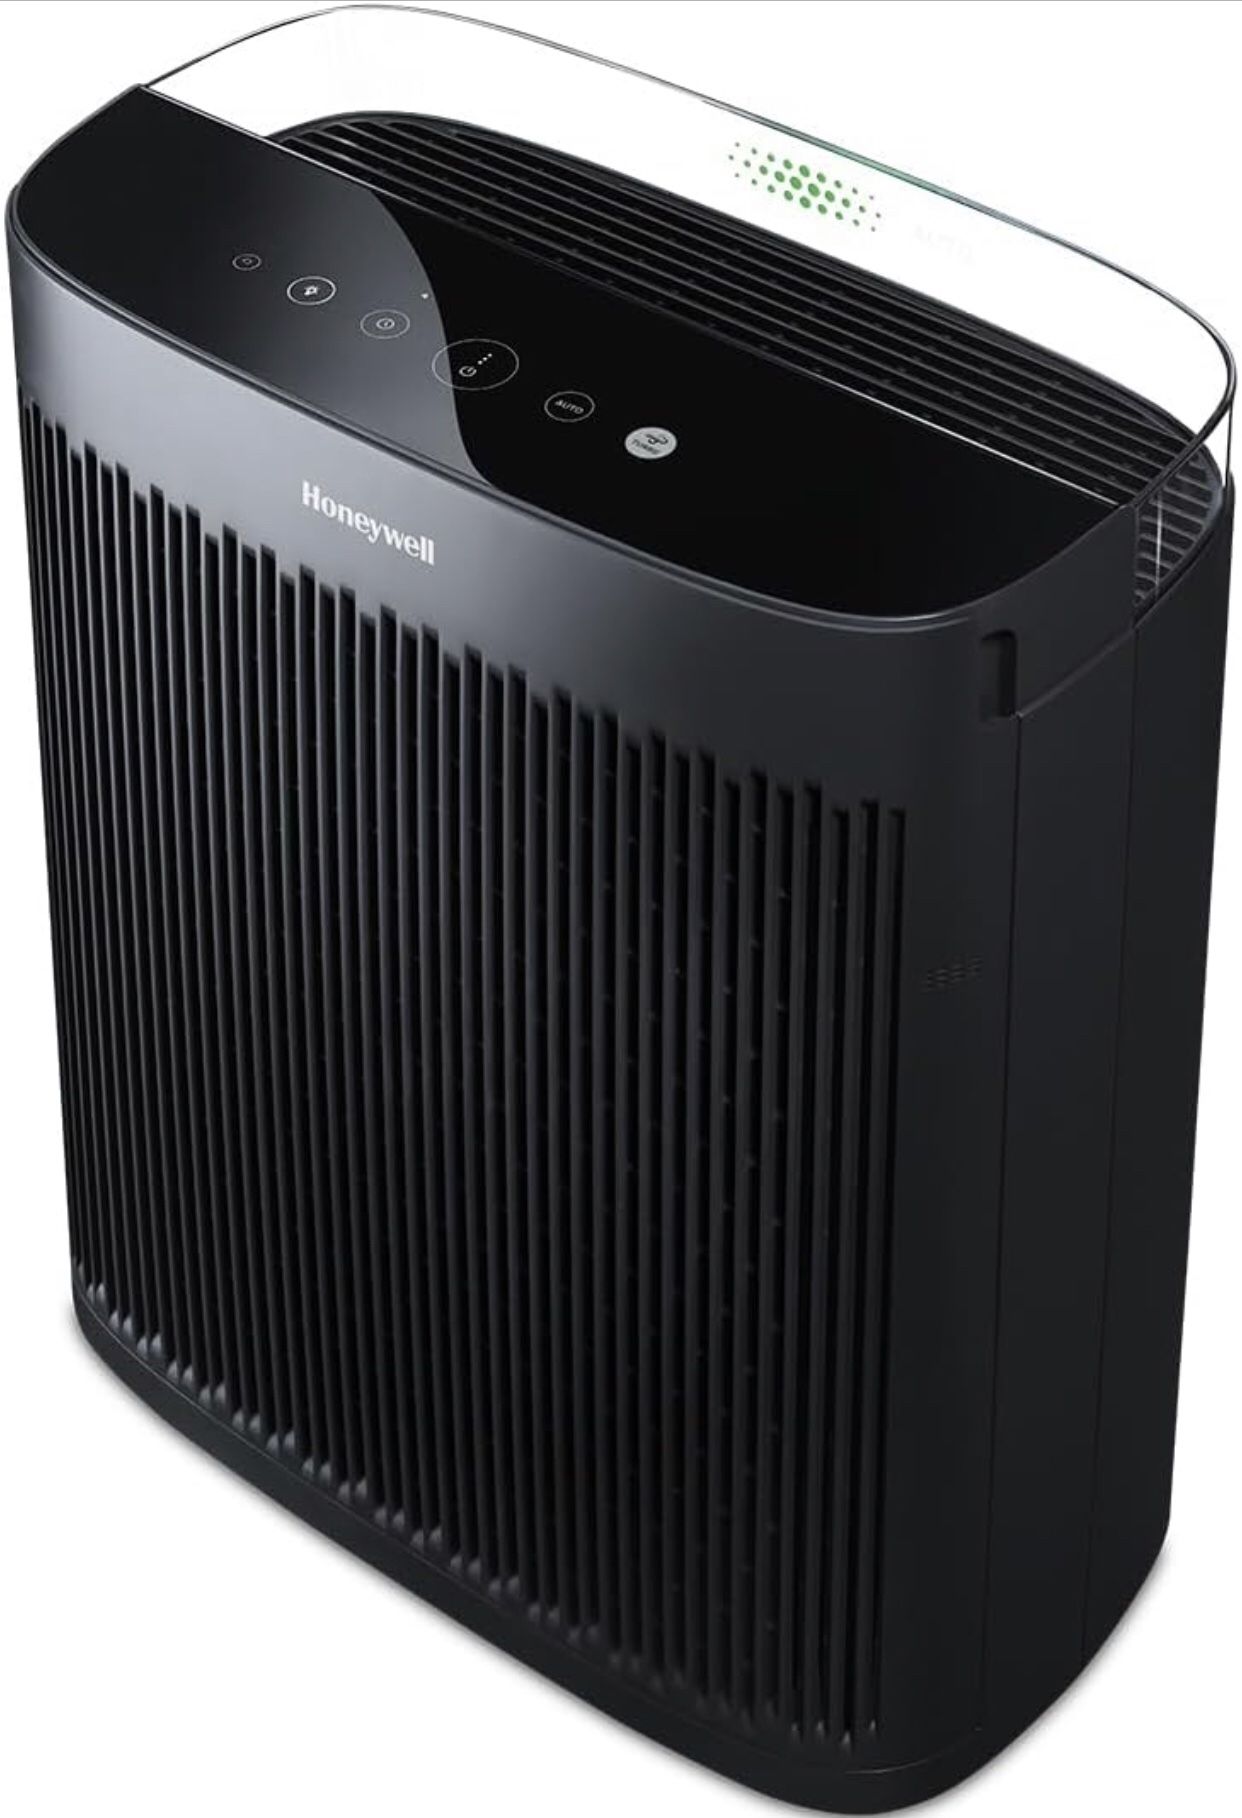 Honeywell InSight HEPA Air Purifier with Air Quality Indicator and Auto Mode, Extra-Large Rooms, Bedrooms, Home (500 sq ft), Black - Reduces Airborne 